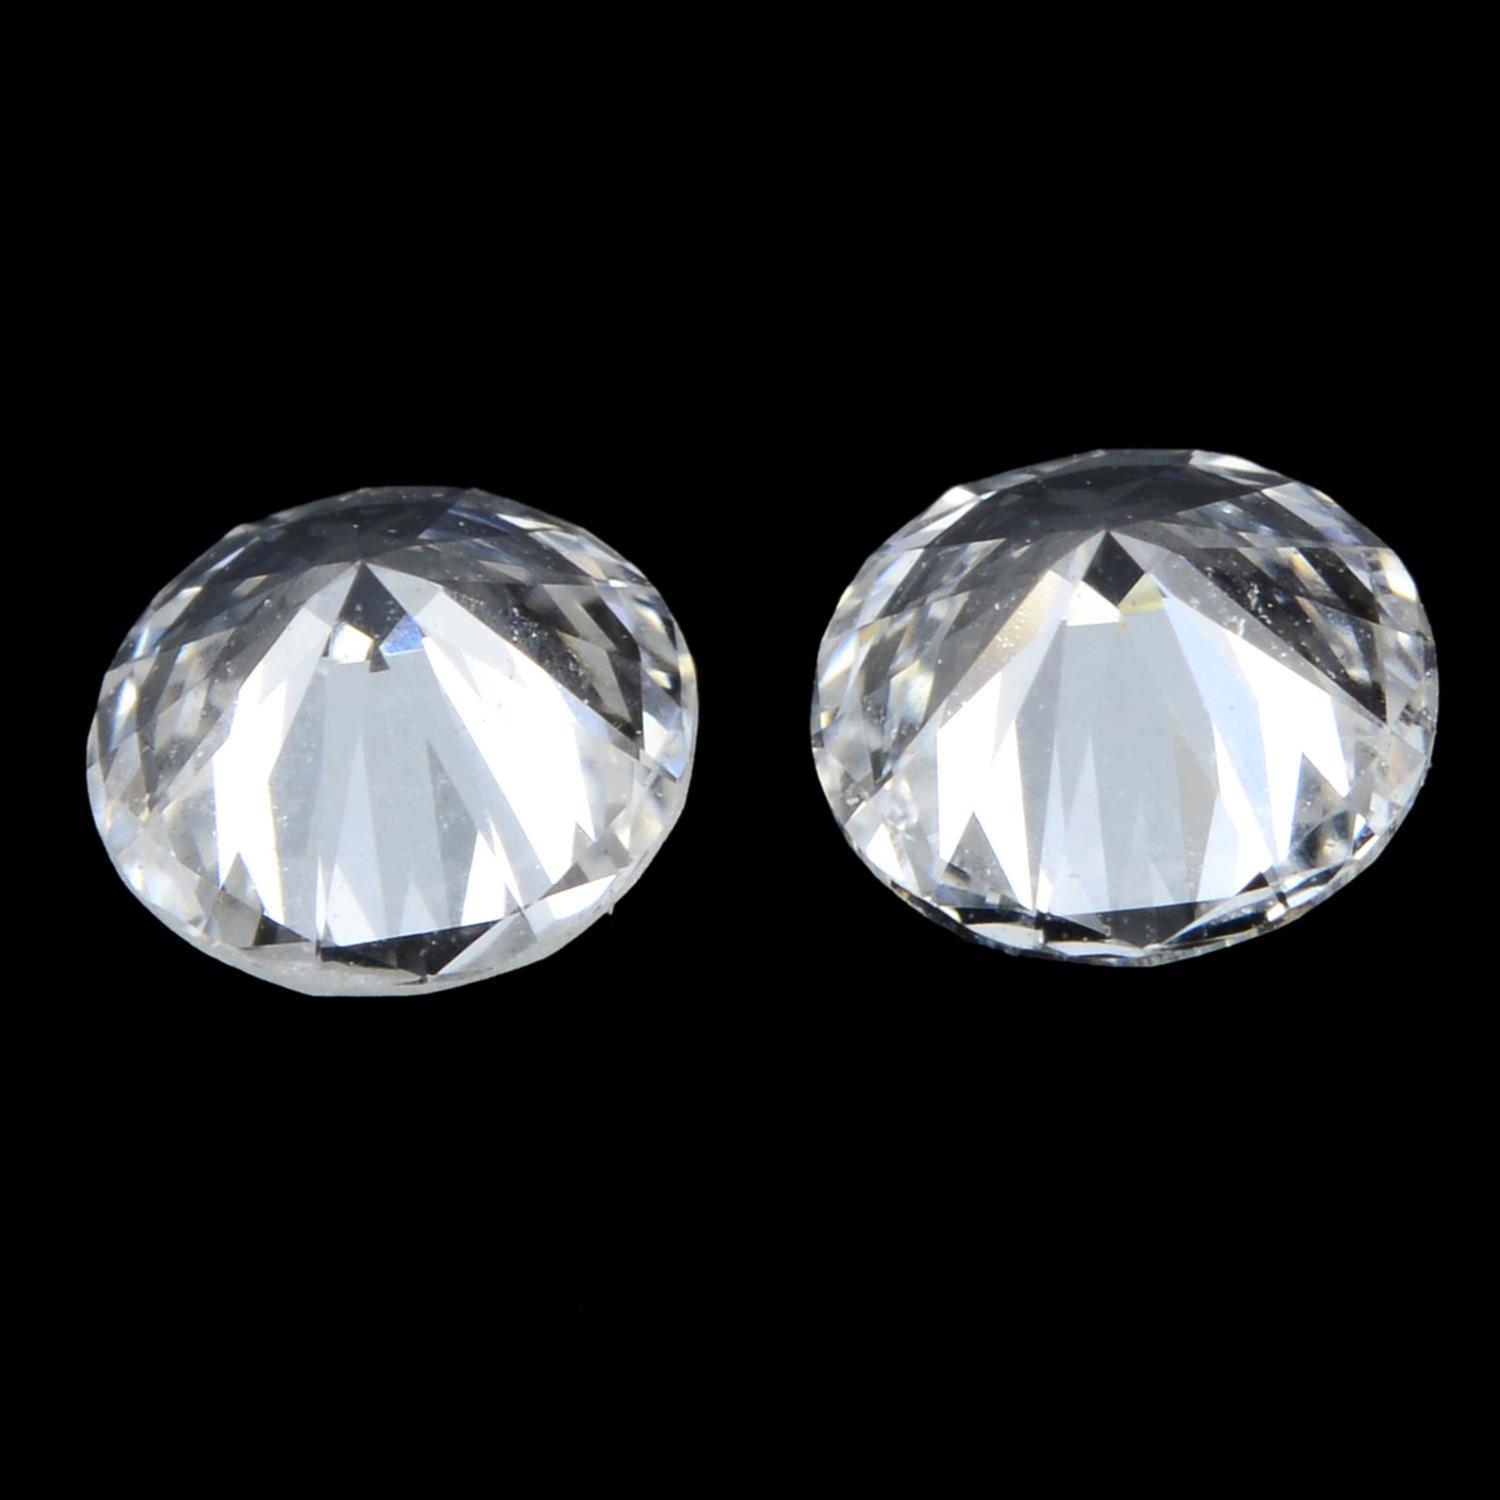 Pair of brilliant cut diamonds weighing 0.45ct - Image 2 of 2